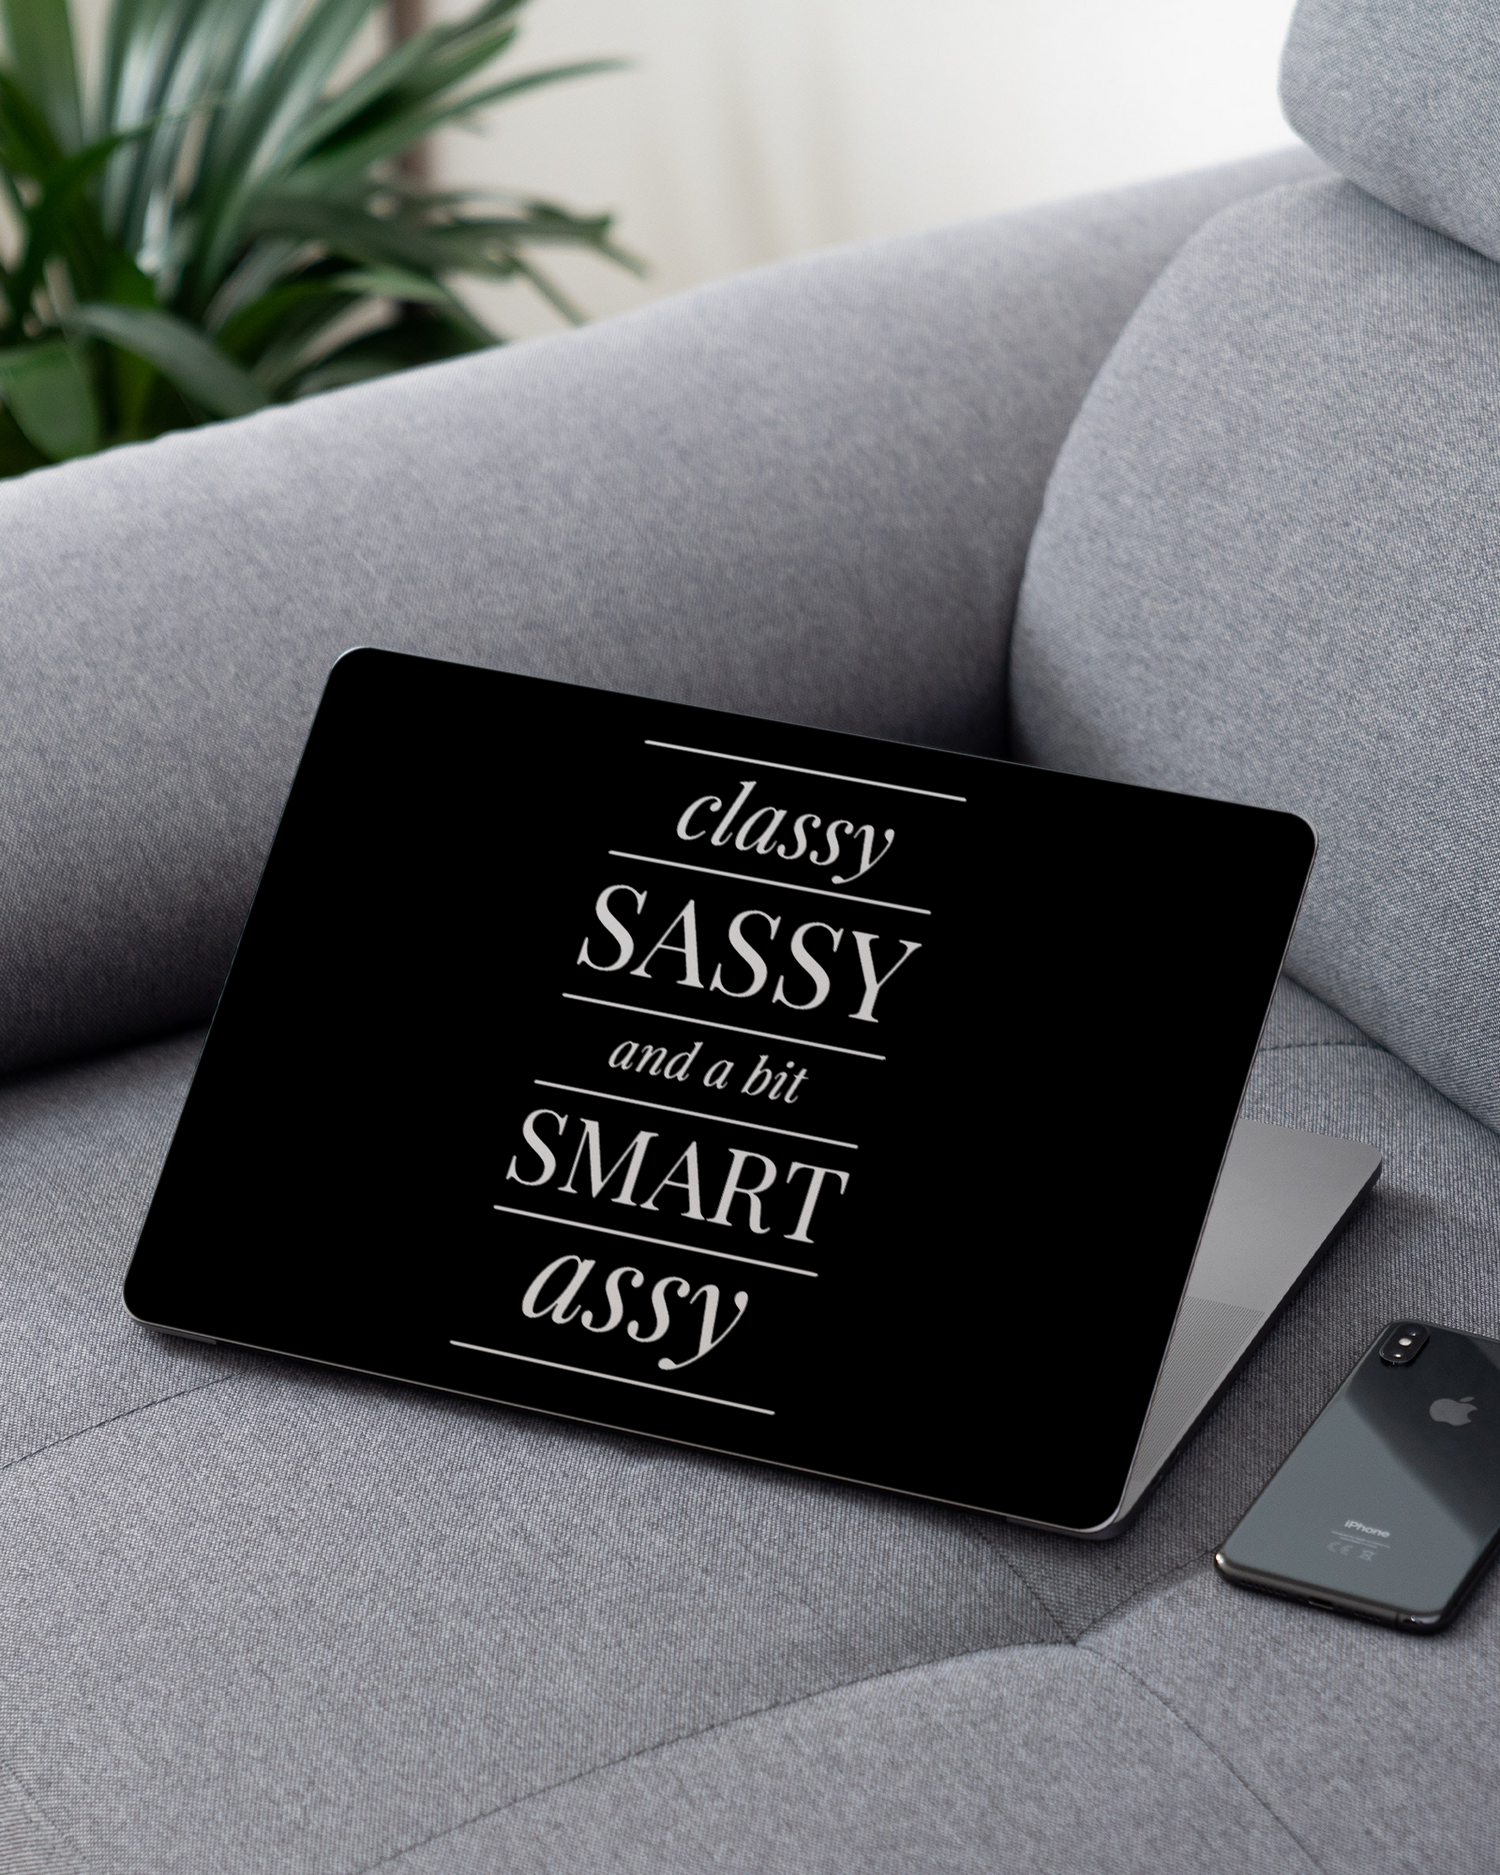 Classy Sassy Laptop Skin for 13 inch Apple MacBooks on a couch